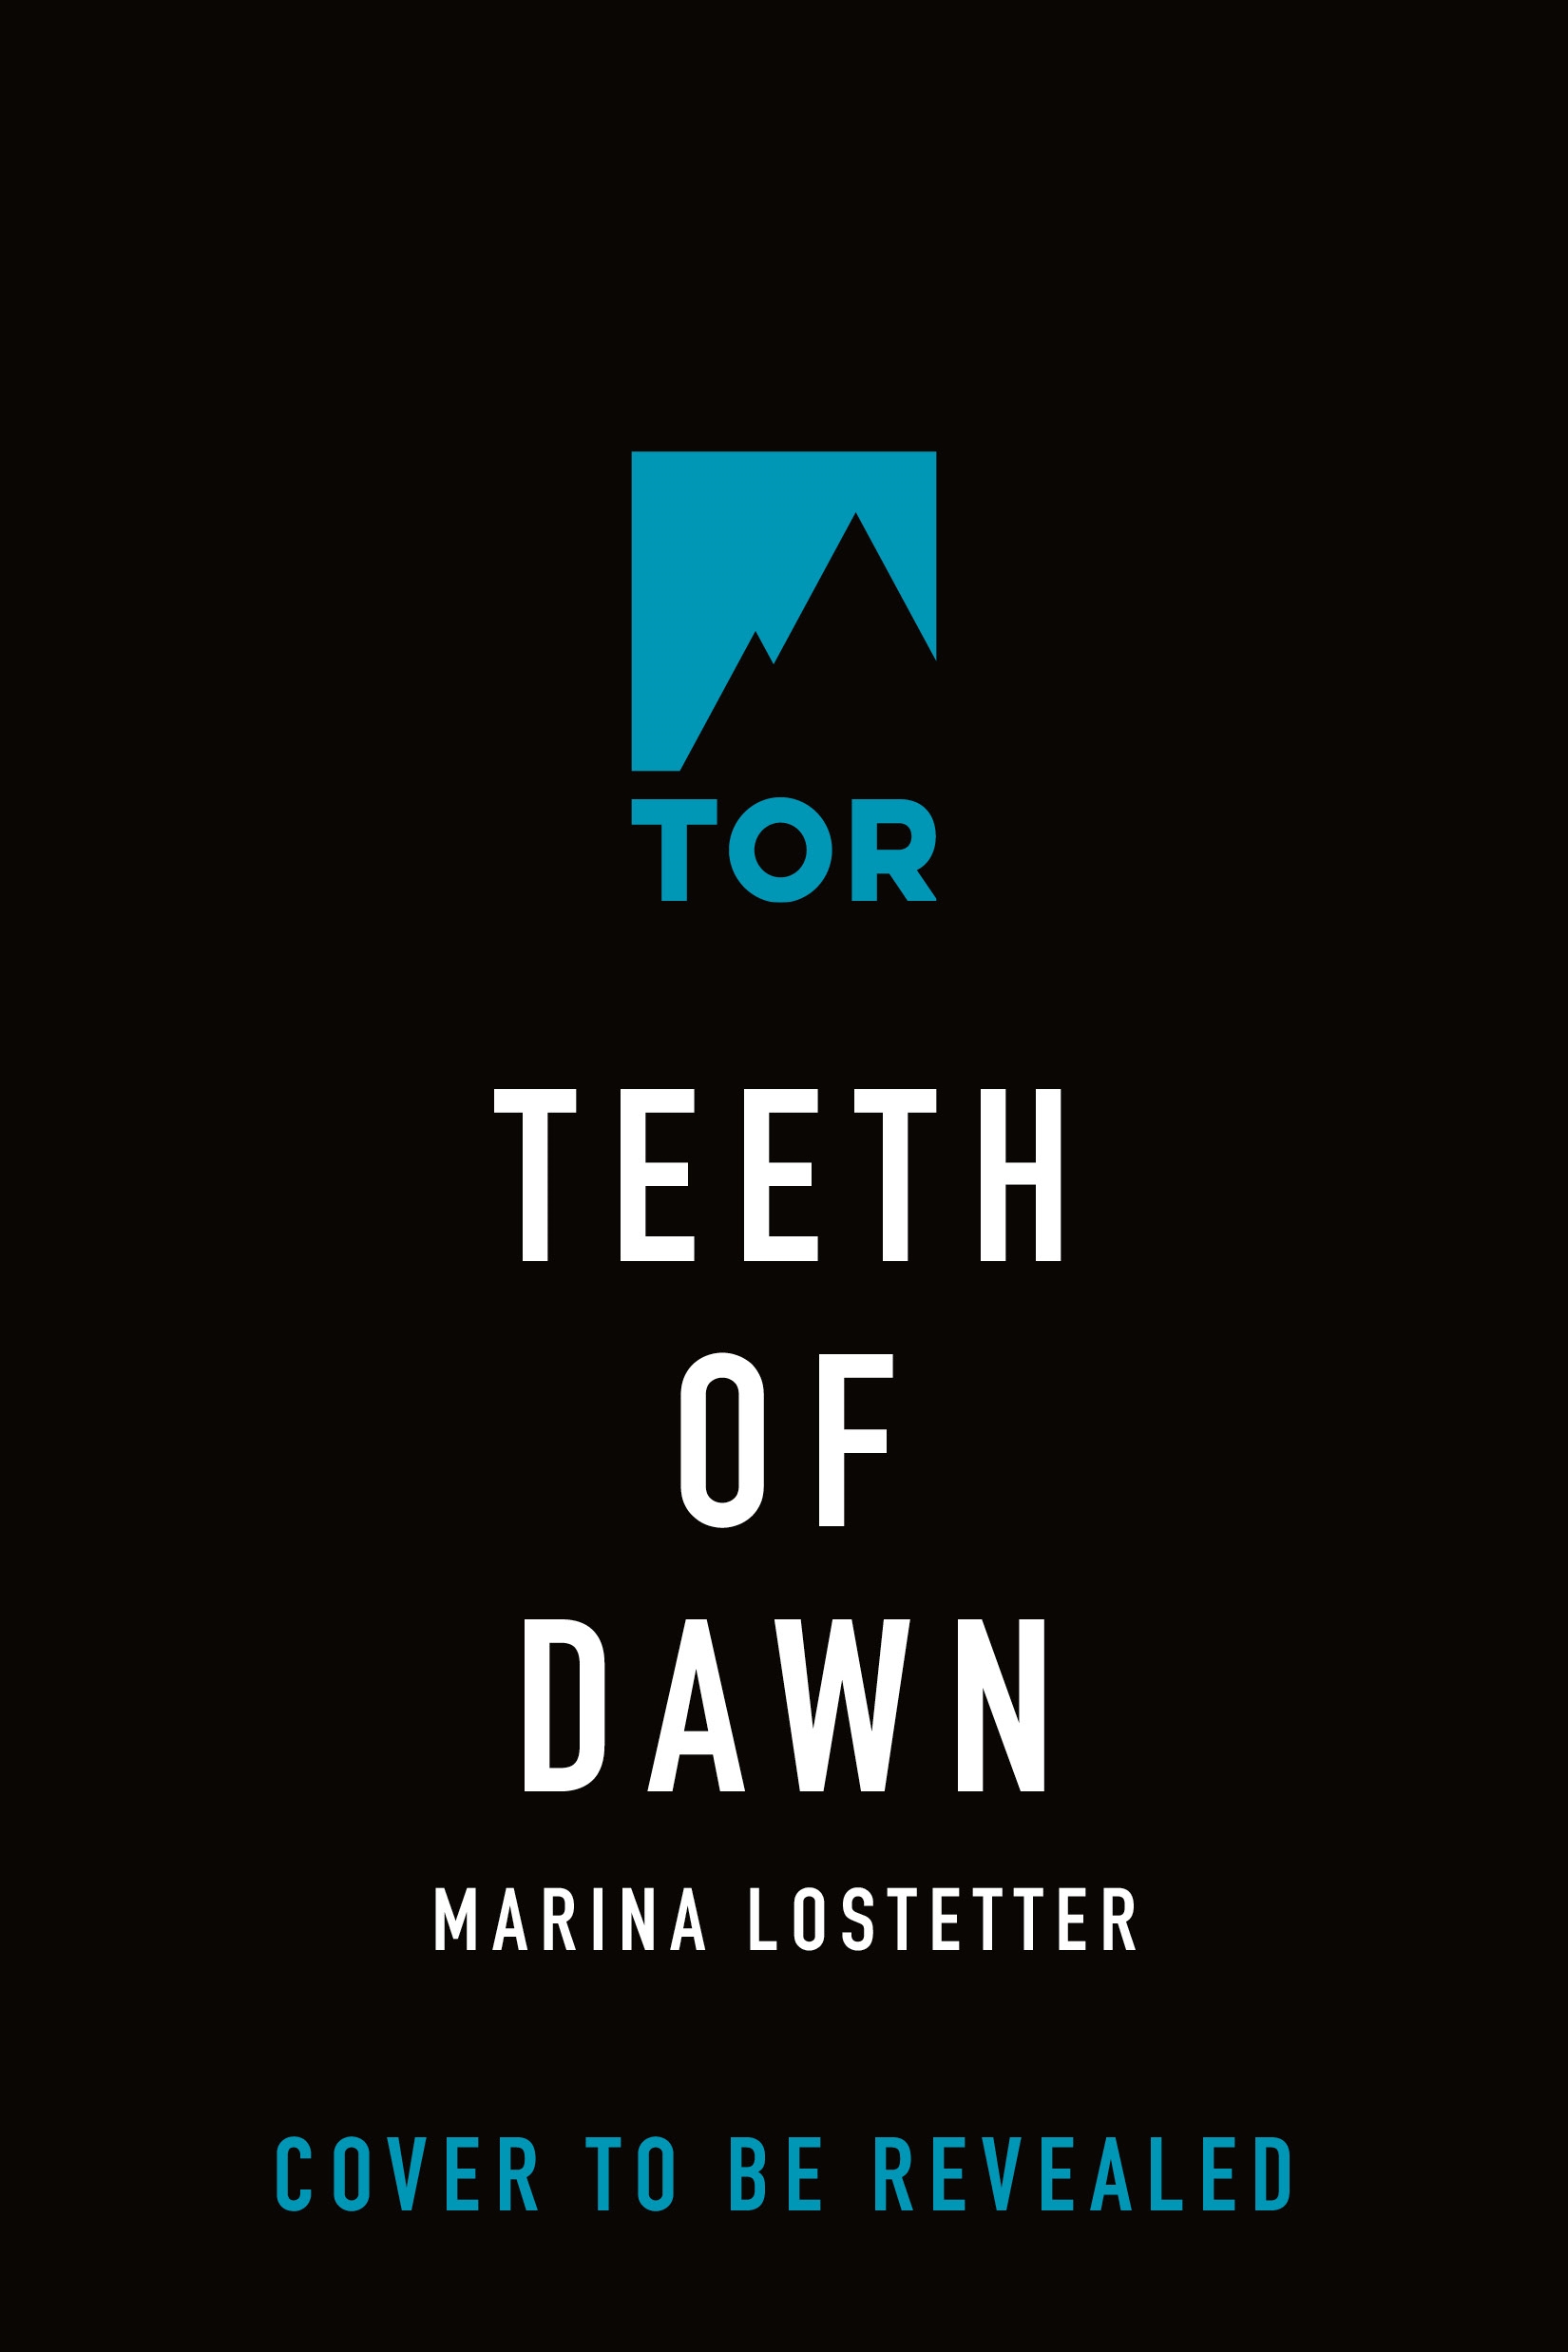 The Teeth of Dawn by Marina Lostetter